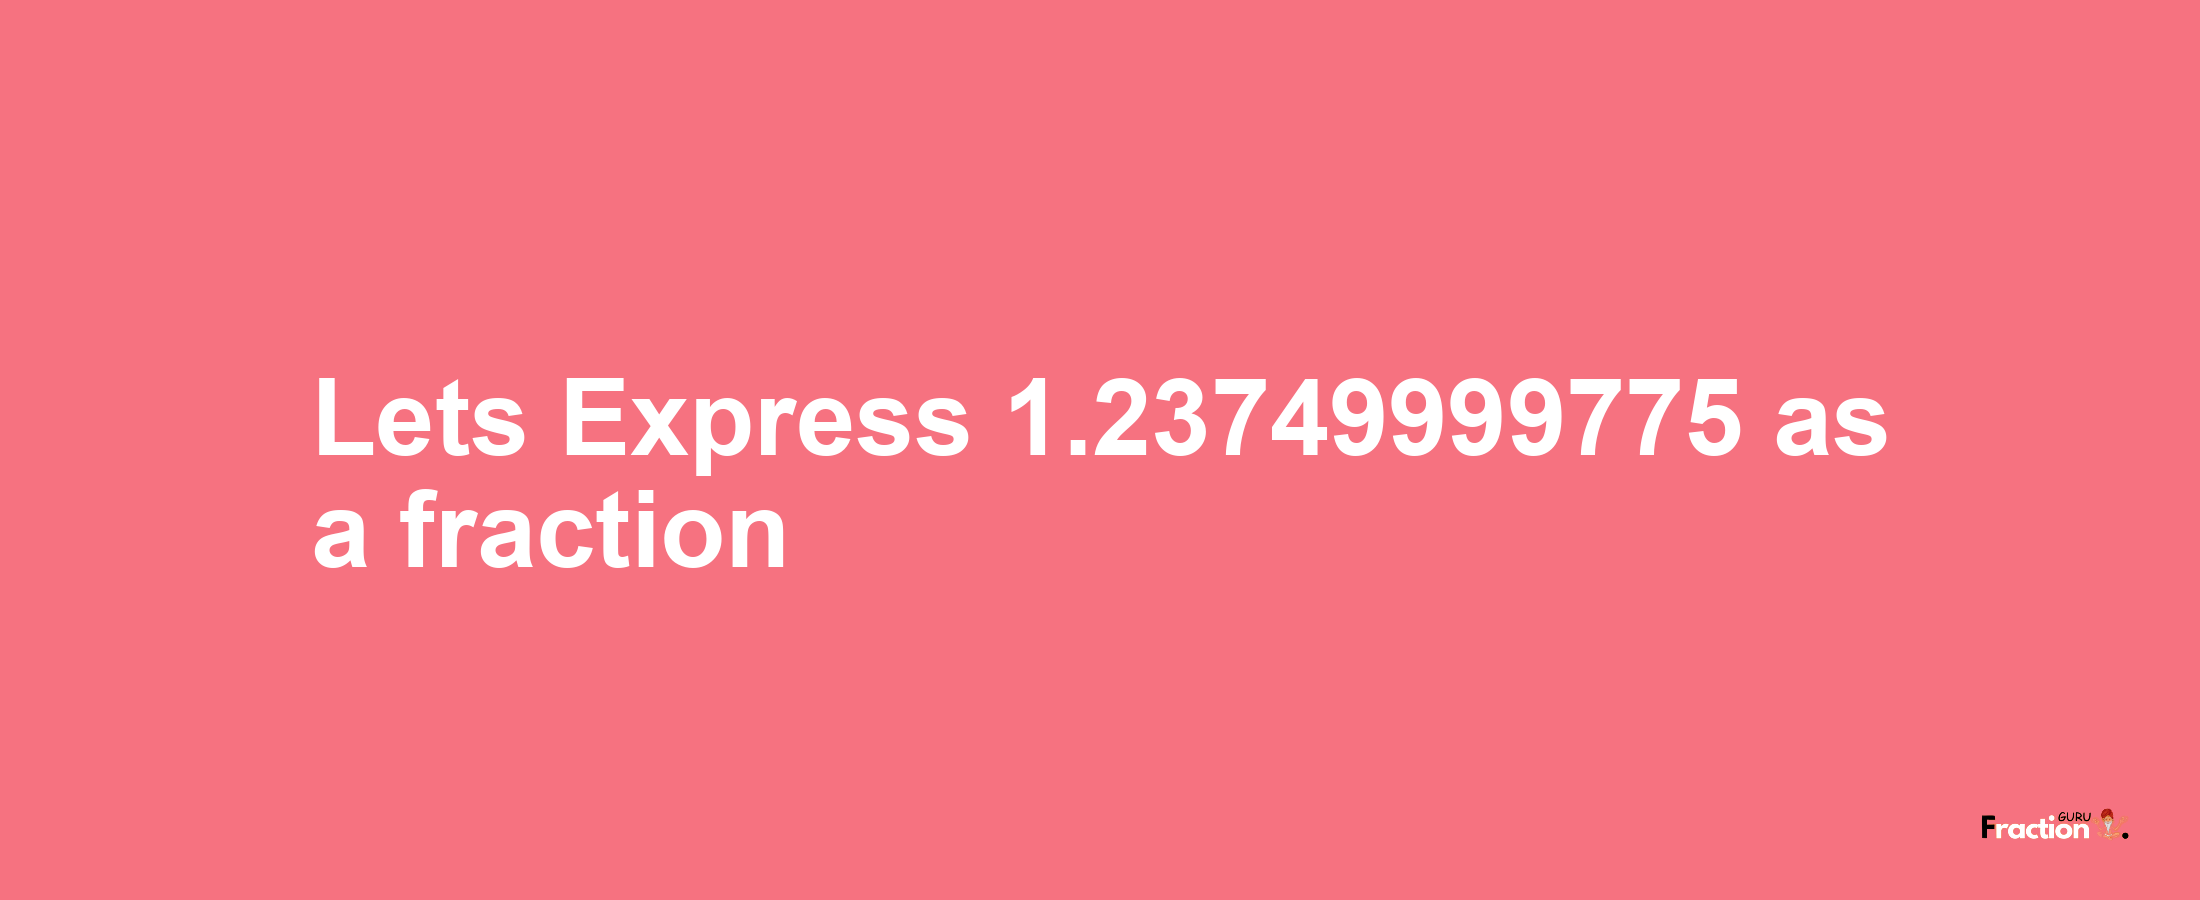 Lets Express 1.23749999775 as afraction